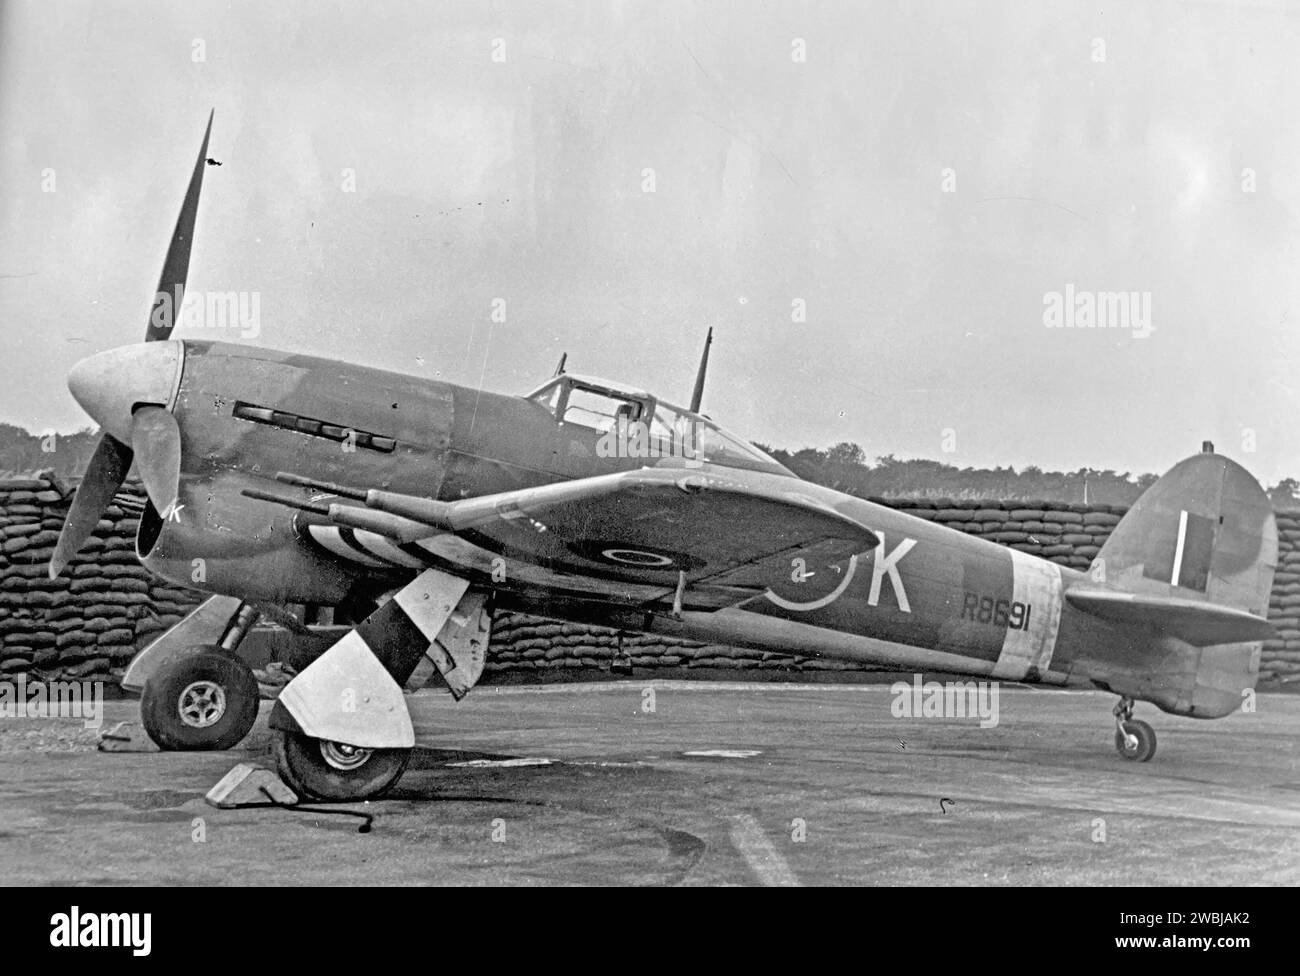 HAWKER TYPHOON Ib FM-K (R4691) of 257 (Burma) Squadron RAF at Warmwell in the summer of 1943. This aircraft was normally flown by F/O E. Spencer. Photo: Eric Sykes Stock Photo